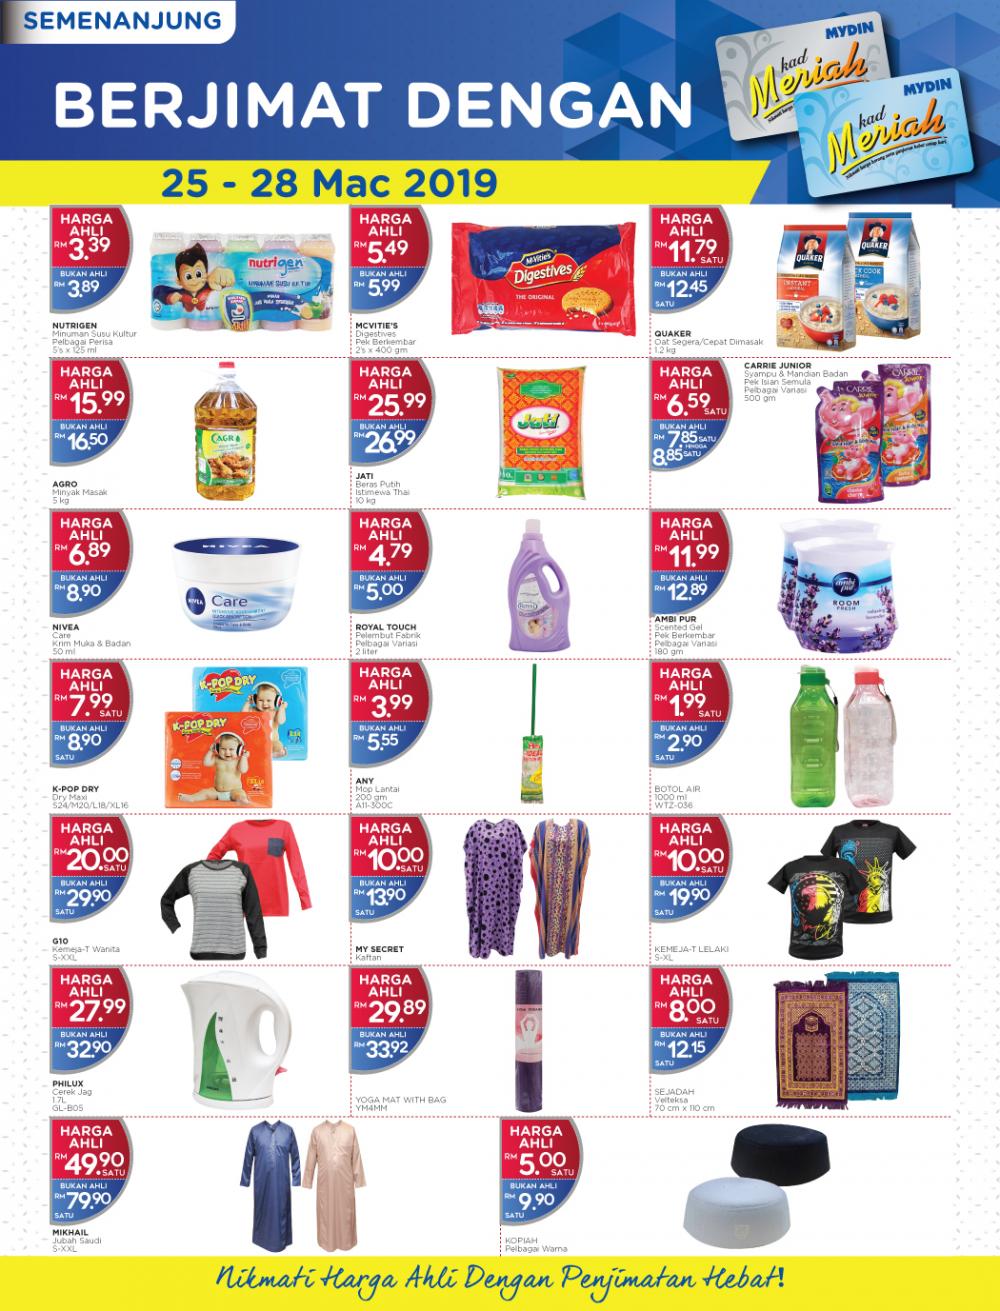 MYDIN Meriah Special Promotion (25 March 2019 - 28 March 2019)